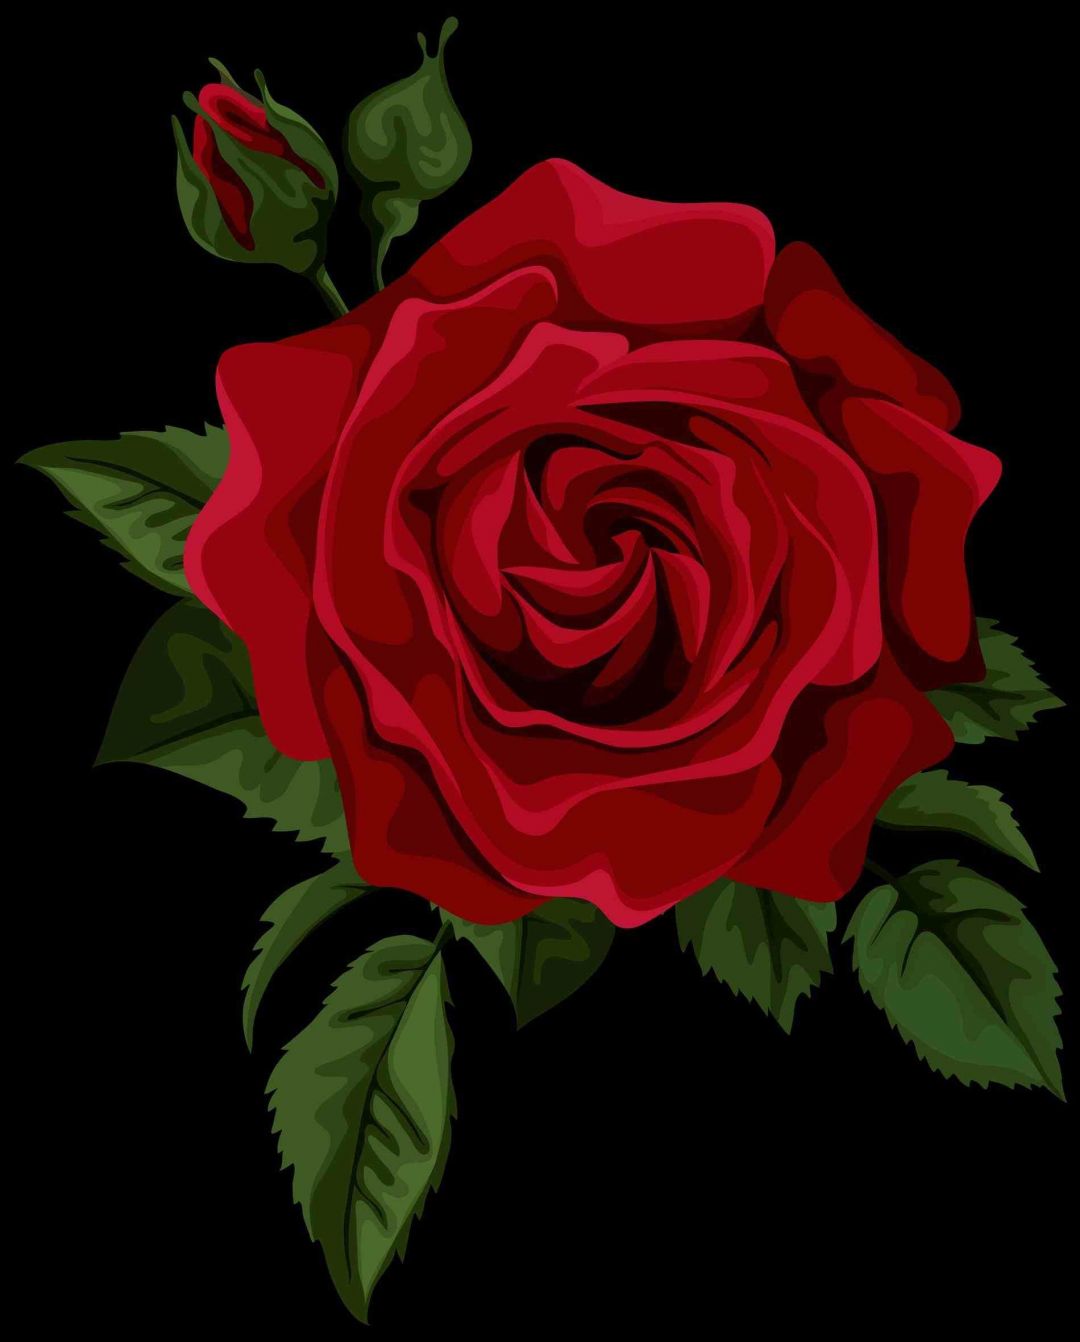 ✓[255+] Single Red Rose Wallpaper - Android / iPhone HD Wallpaper  Background Download (png / jpg) (2023)